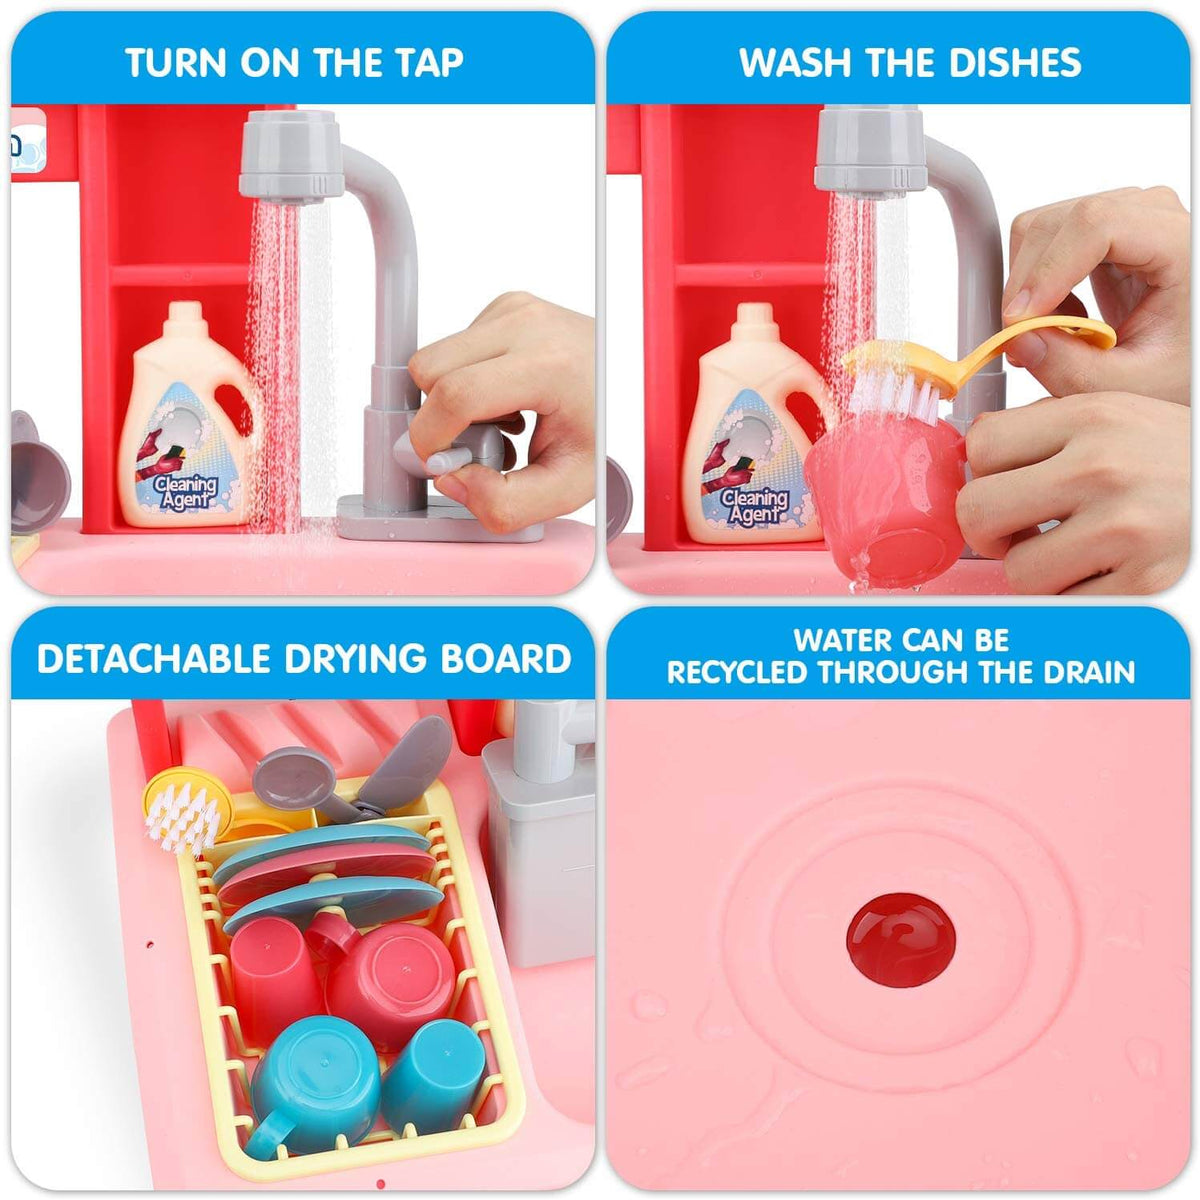 Kitchen Sink Toy For Toddlers - 17 Pieces Kitchen Sink Toy Set - Play22usa  : Target